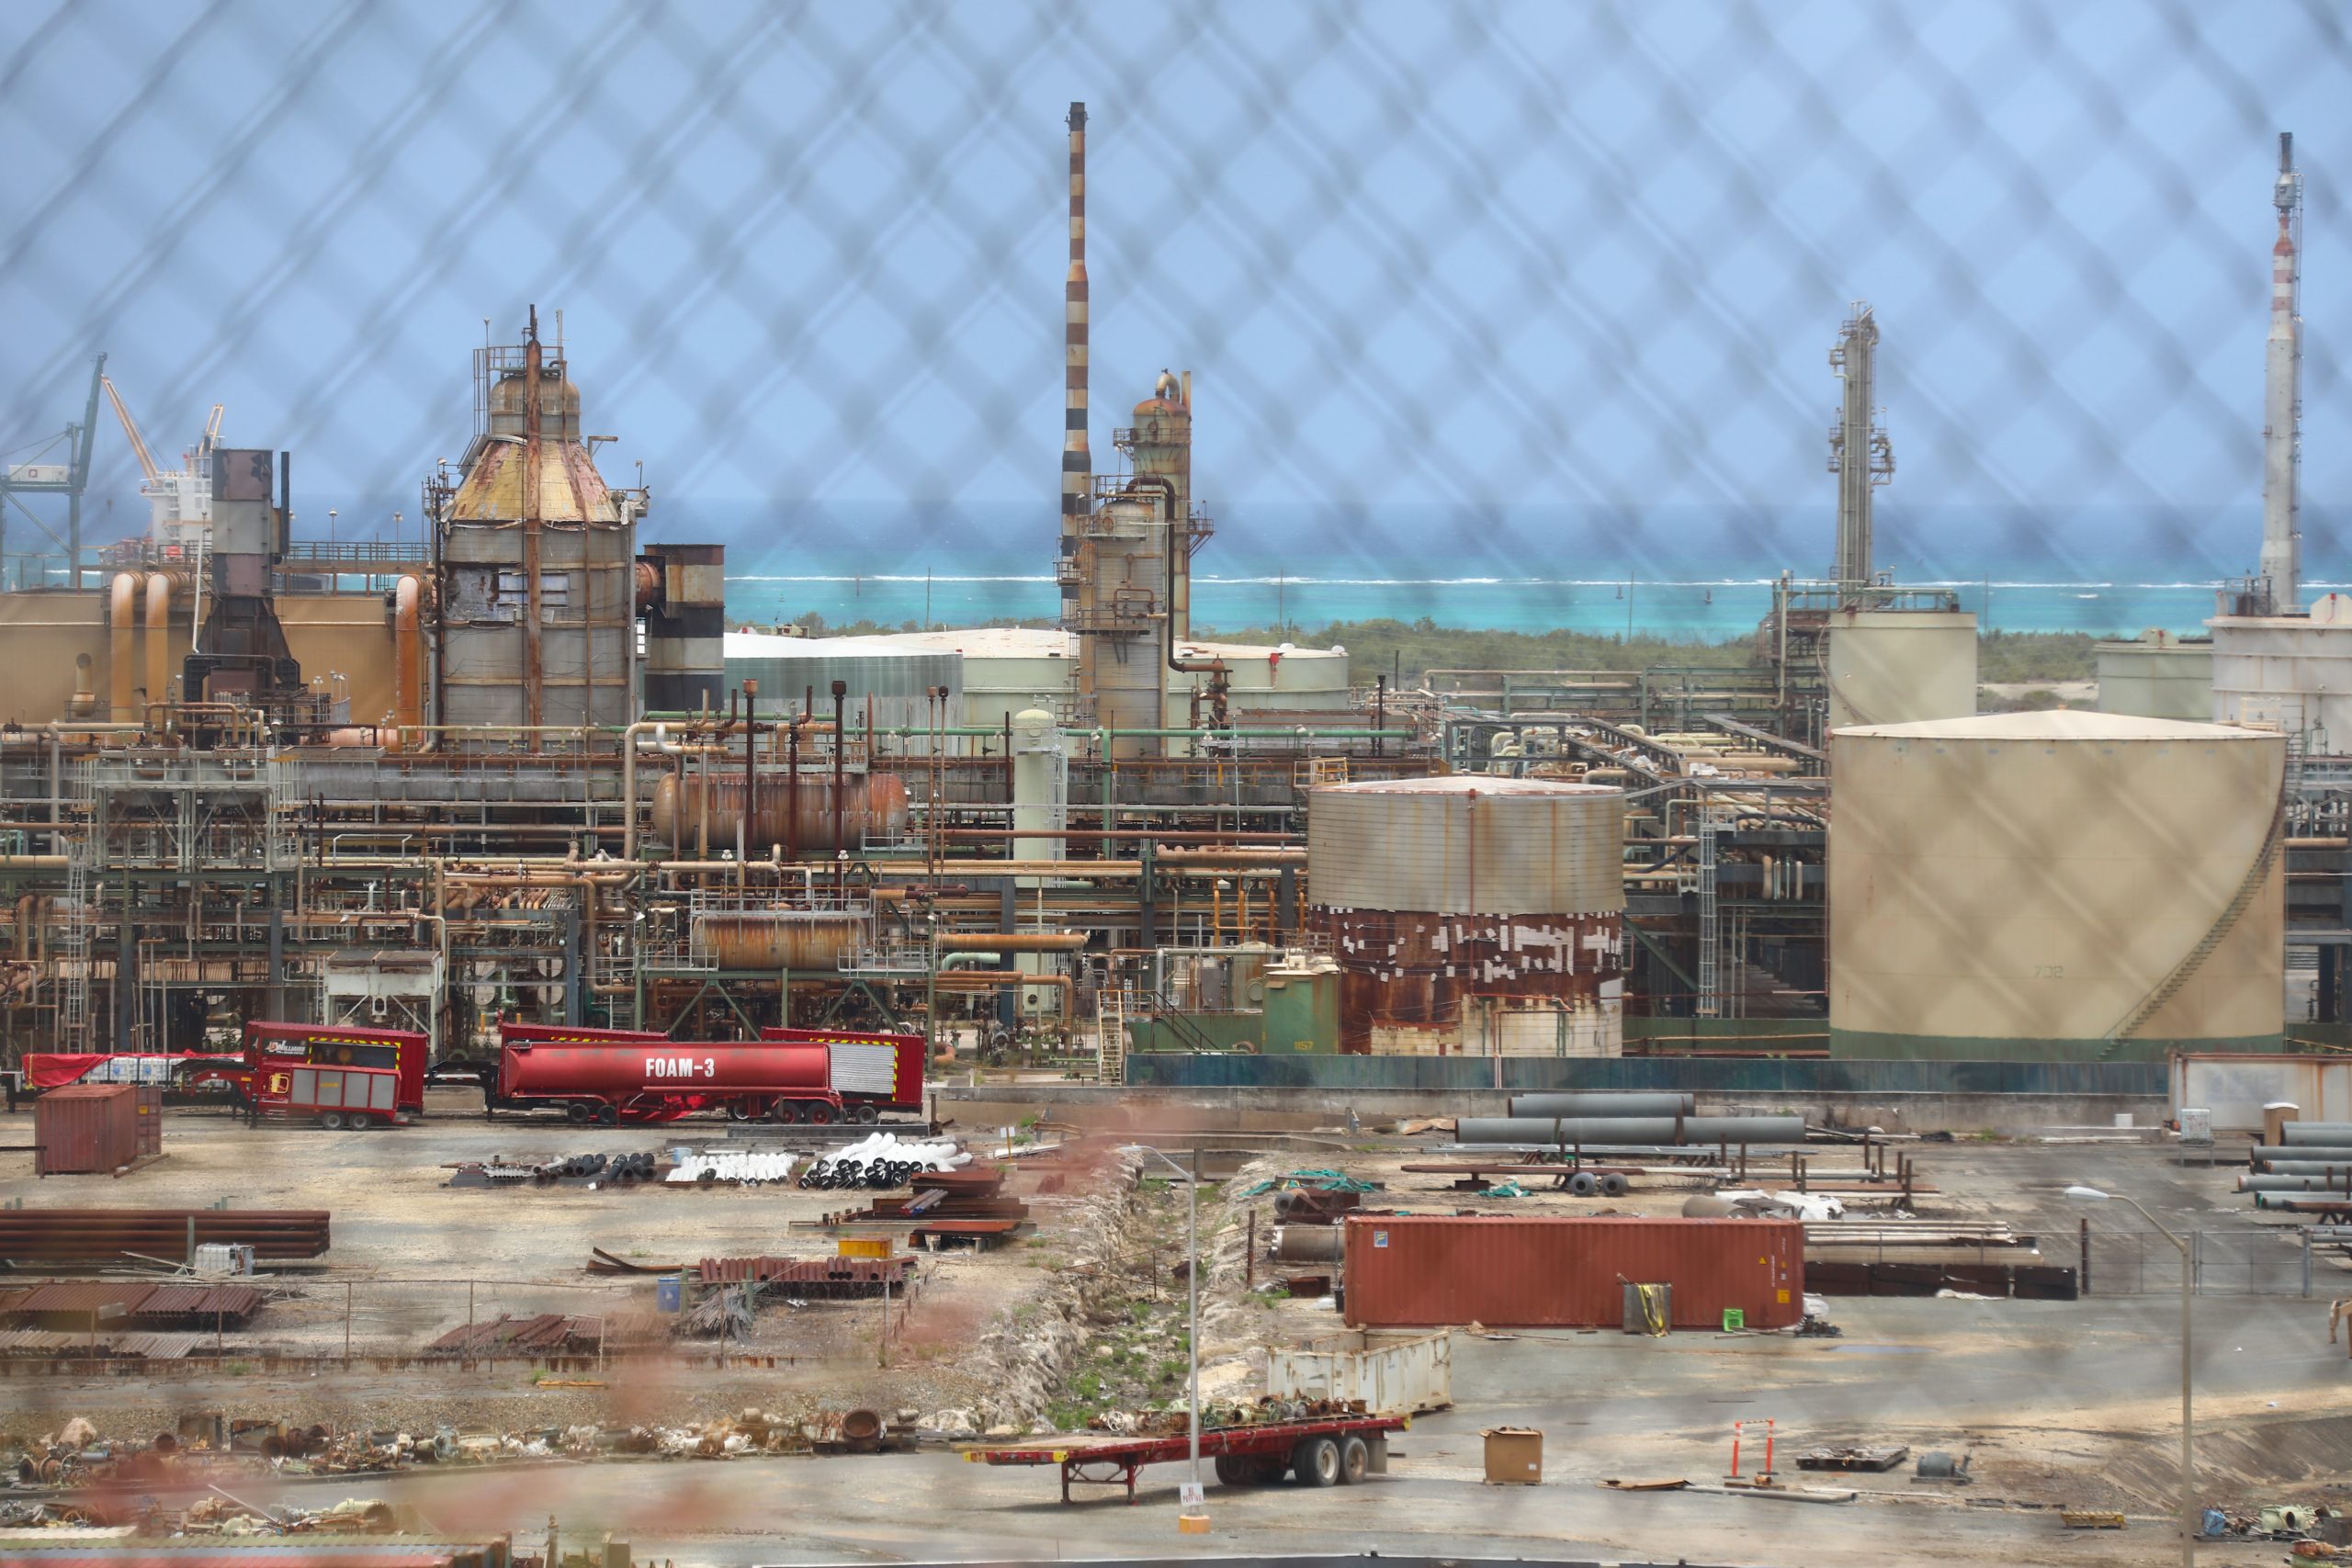 On the south shore of St. Croix in the U.S. Virgin Islands, the defunct west end of Limetree Bay Refinery overlooks an aqua sea on Tuesday, May 25. (Source photo by Patricia Borns)